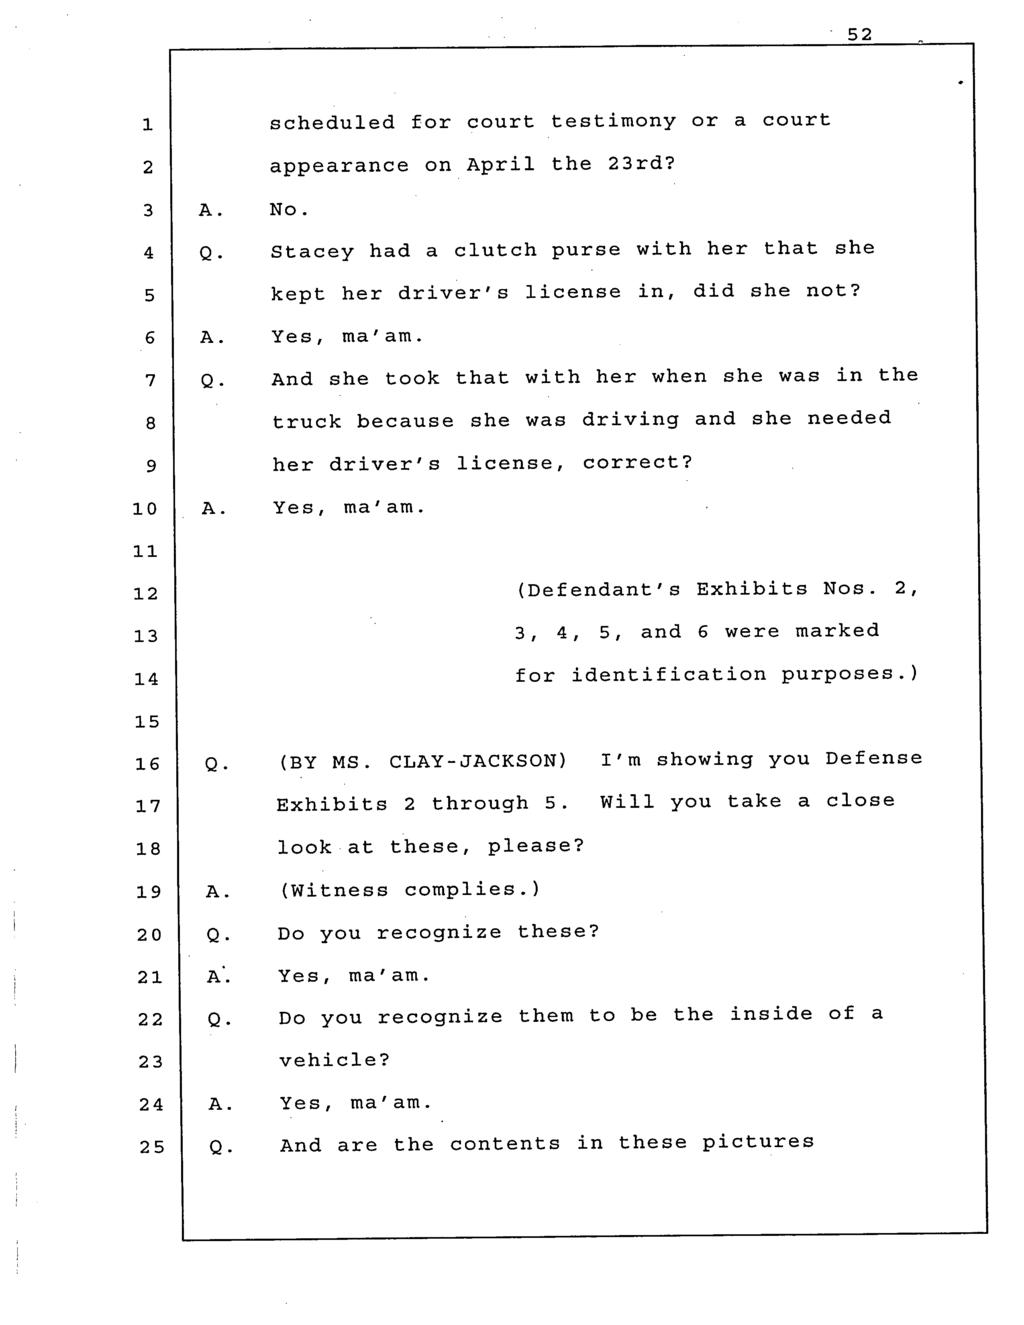 scheduled for court testimony or a appearance on April the rd? No. court Stacey had a clutch purse with her that she kept her driver's license in, did she not?